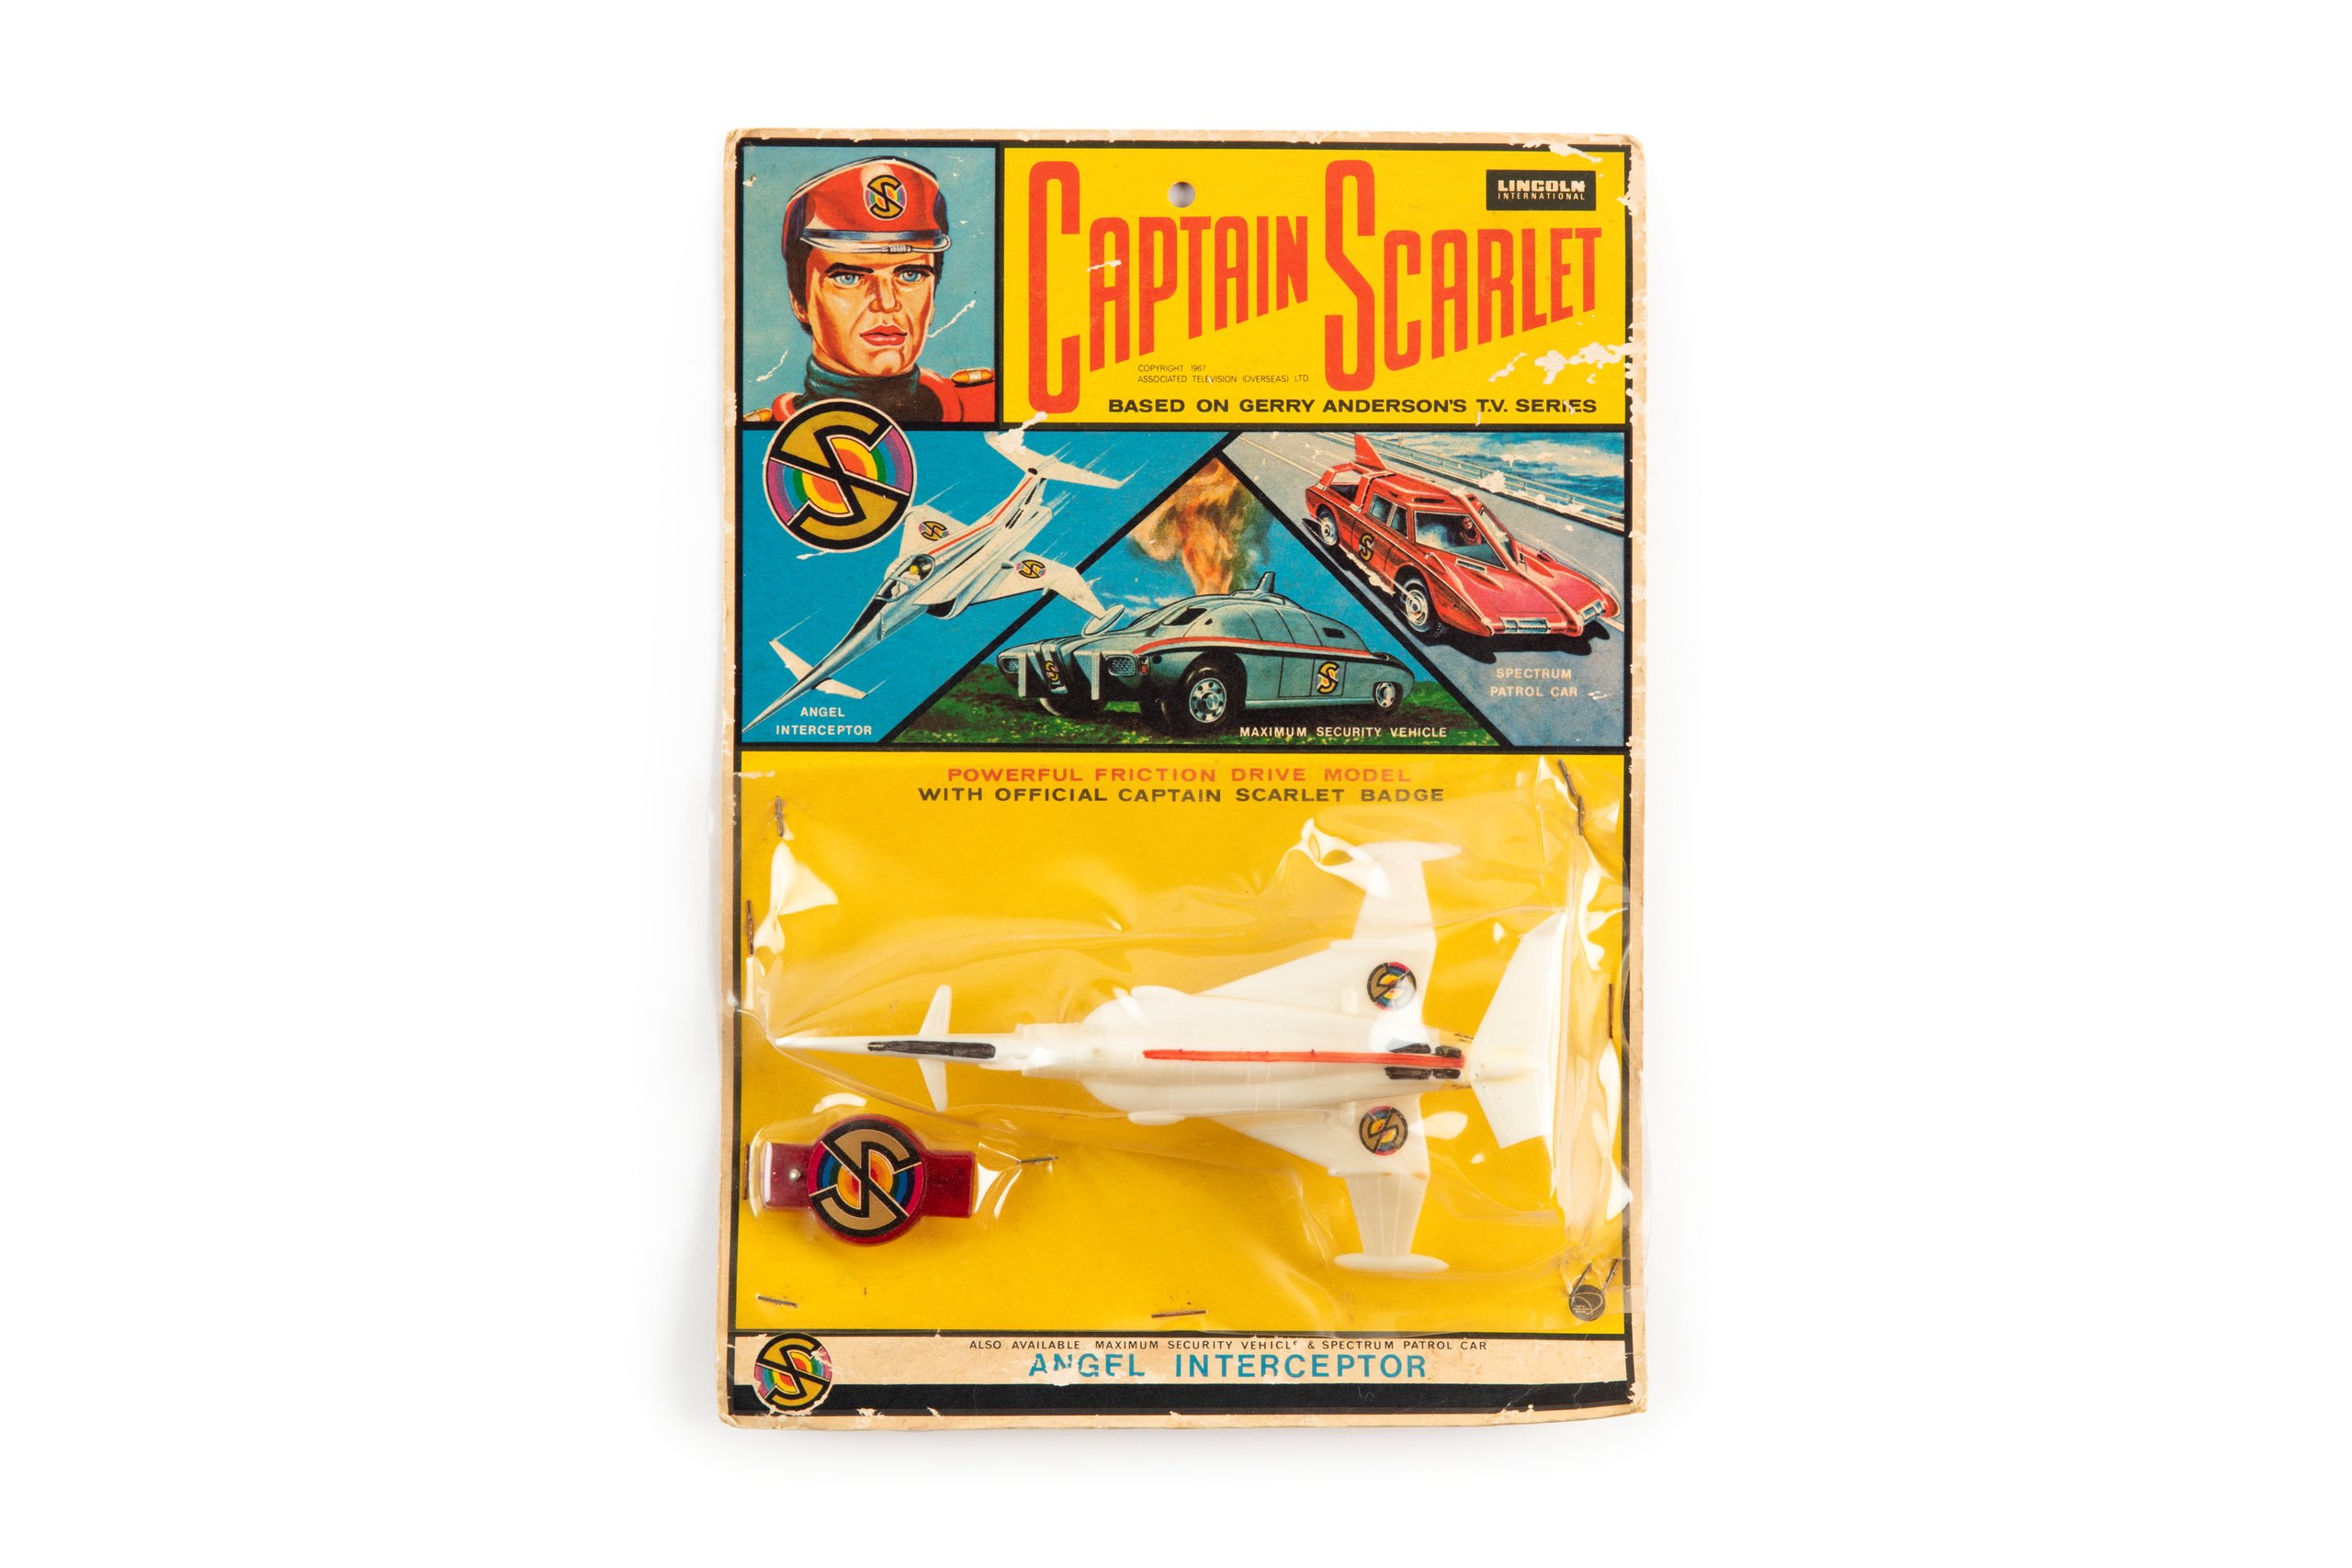 Angel Interceptor jet toy from the TV show 'Captain Scarlet and The Mysterons'